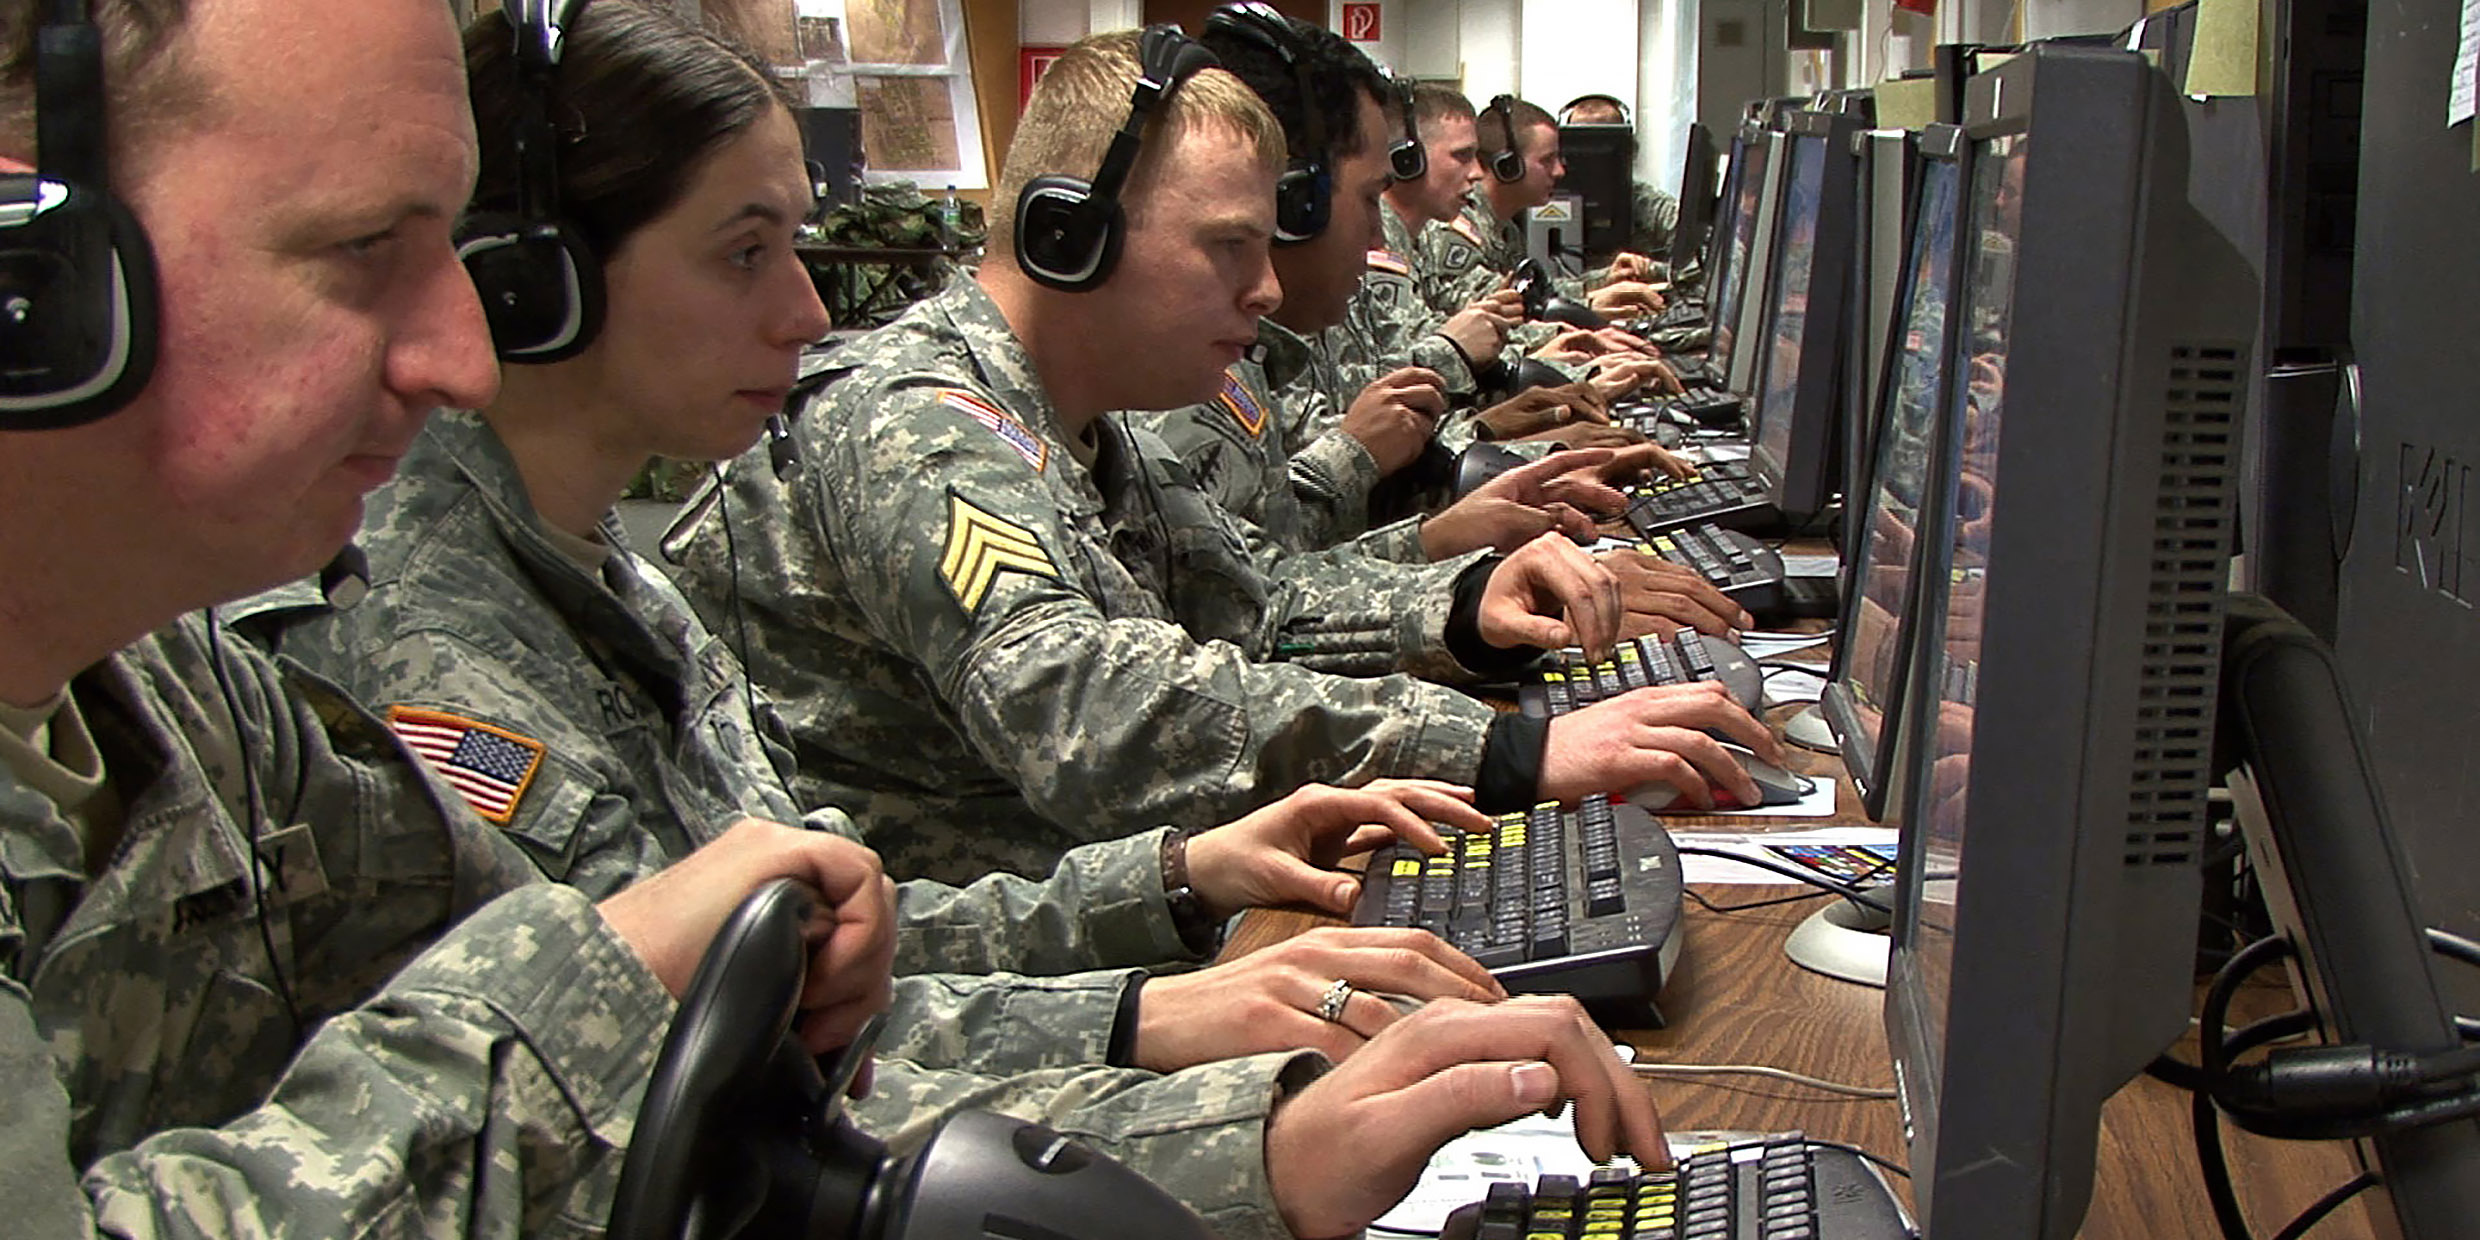 Image of a squad of soldiers lined up behind computer terminals